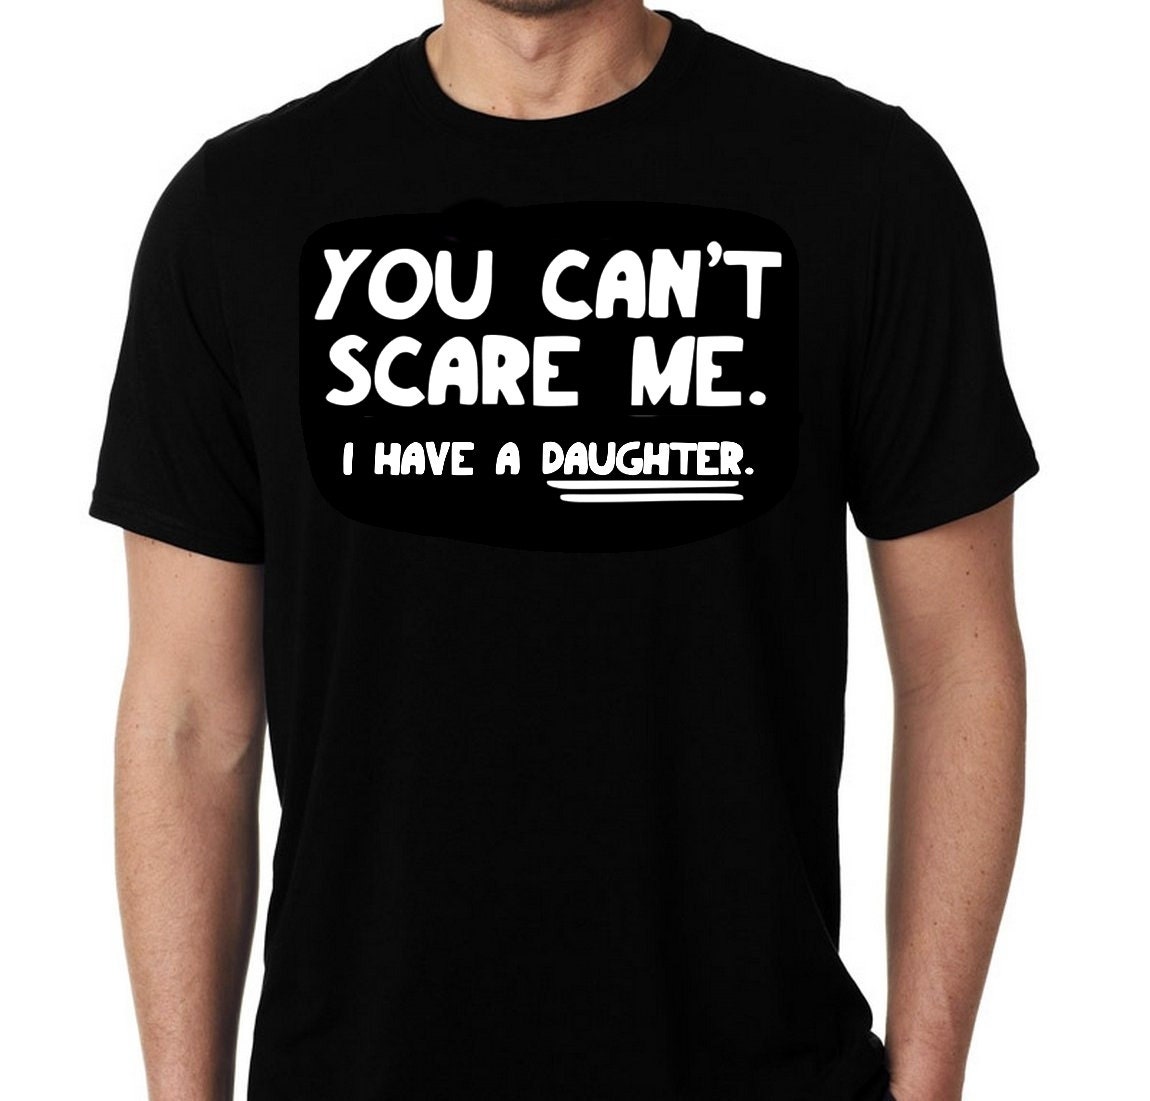 New You Can't Scare Me I have A Daughter Humor by MarieLynnTshirt